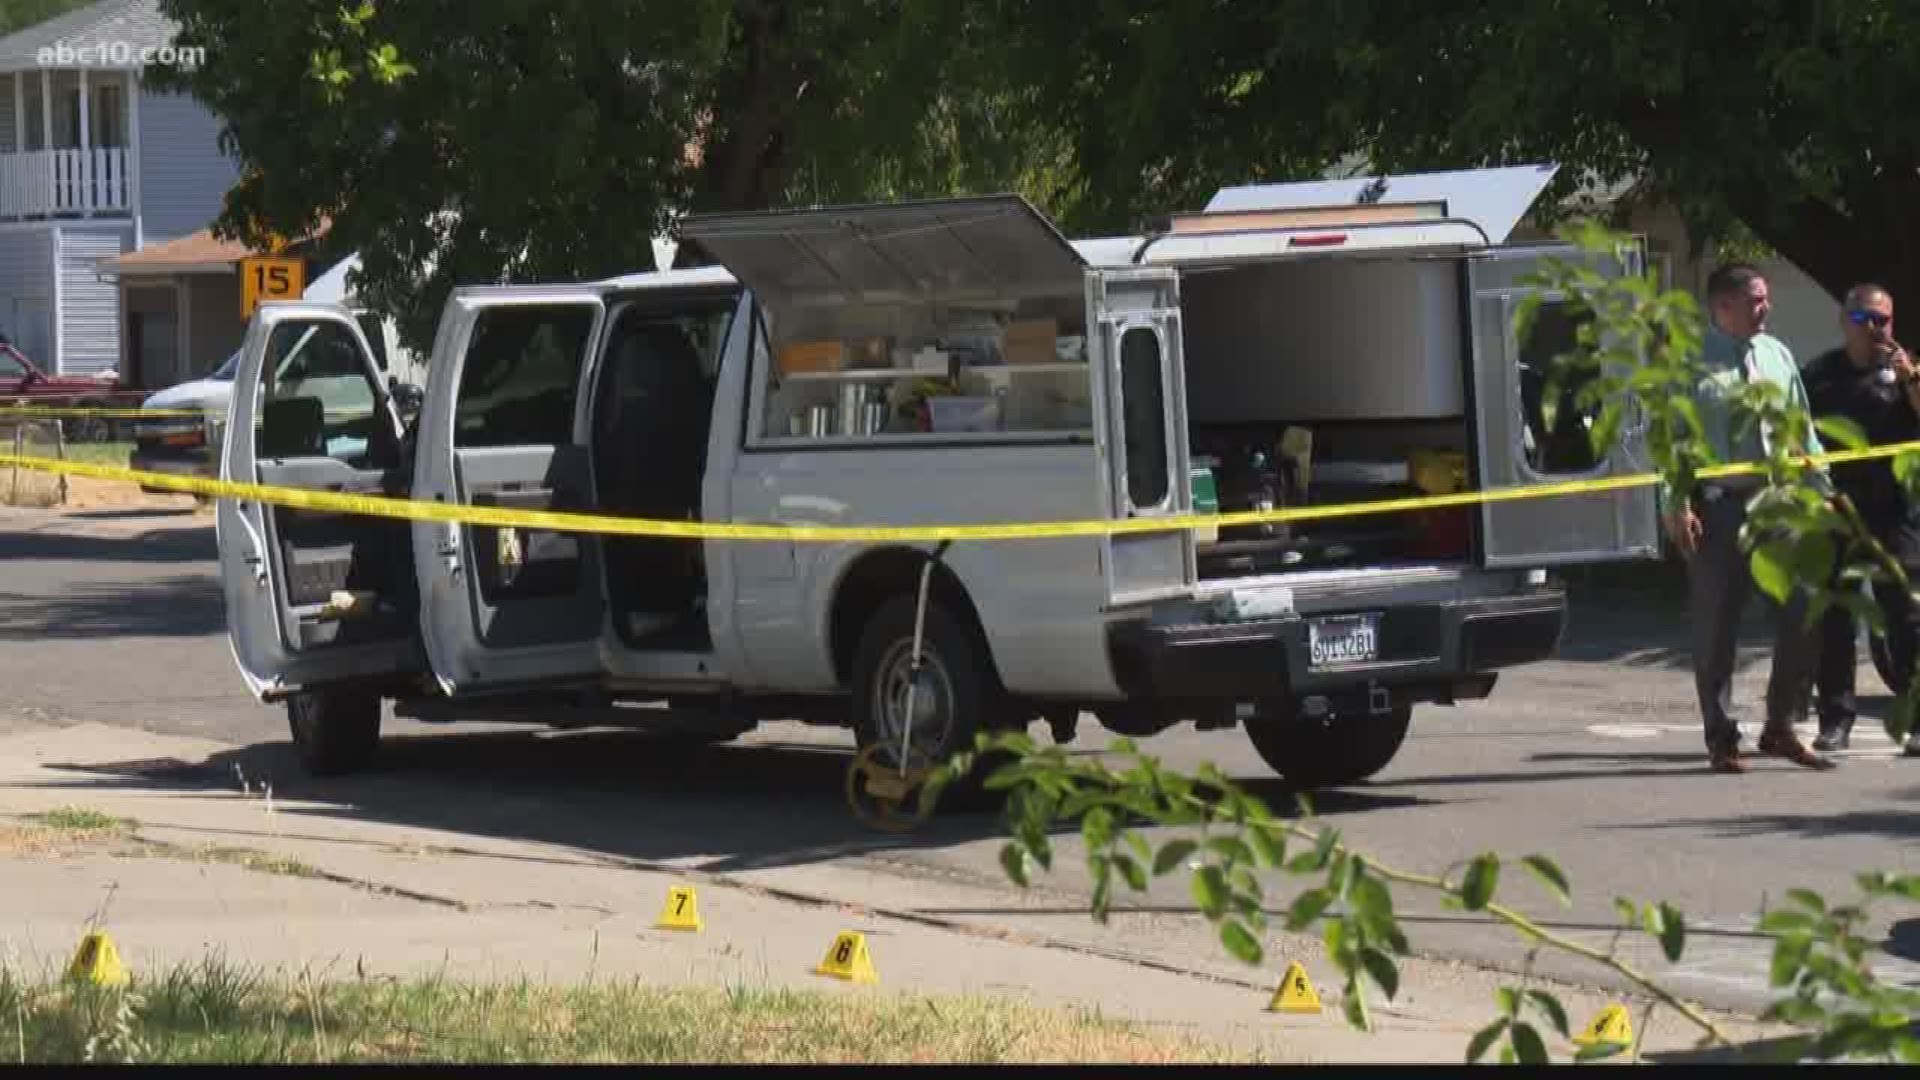 A homicide investigation is underway after a body was found inside a home in South Sacramento, according to the Sacramento County Sheriff's Department. 